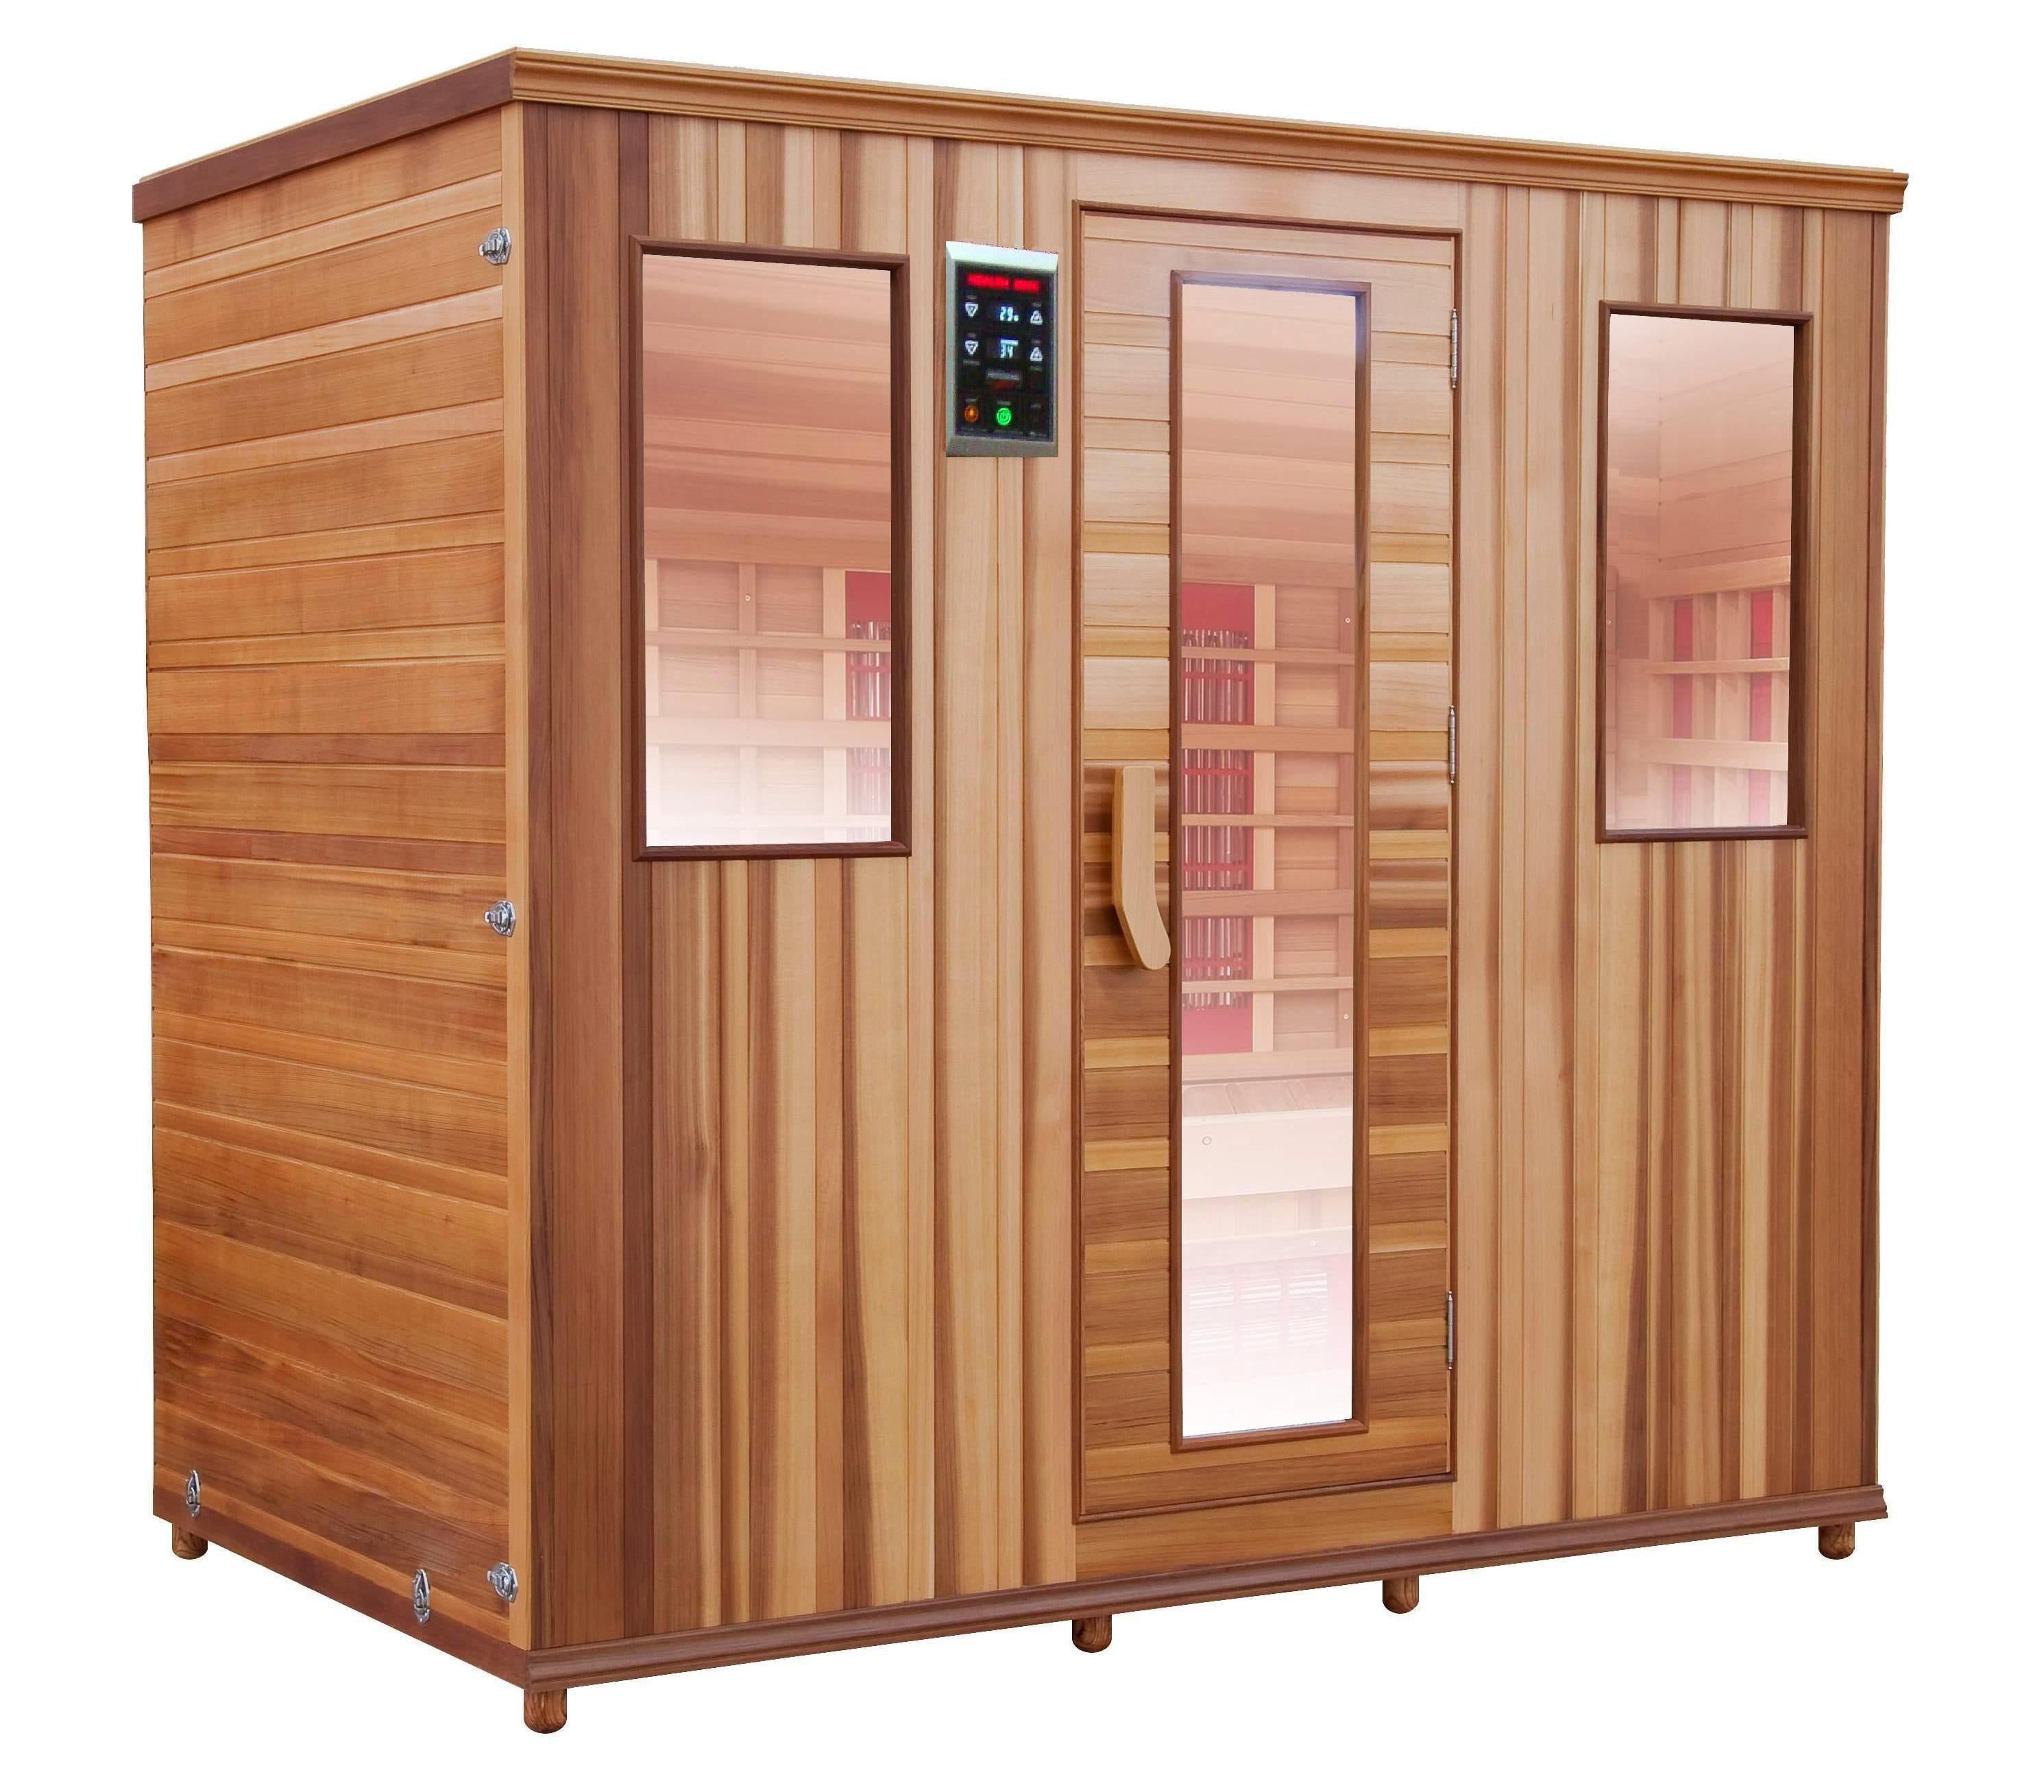 Health Mate - Therapy Lounge Infrared Sauna right facing view with plain blank background